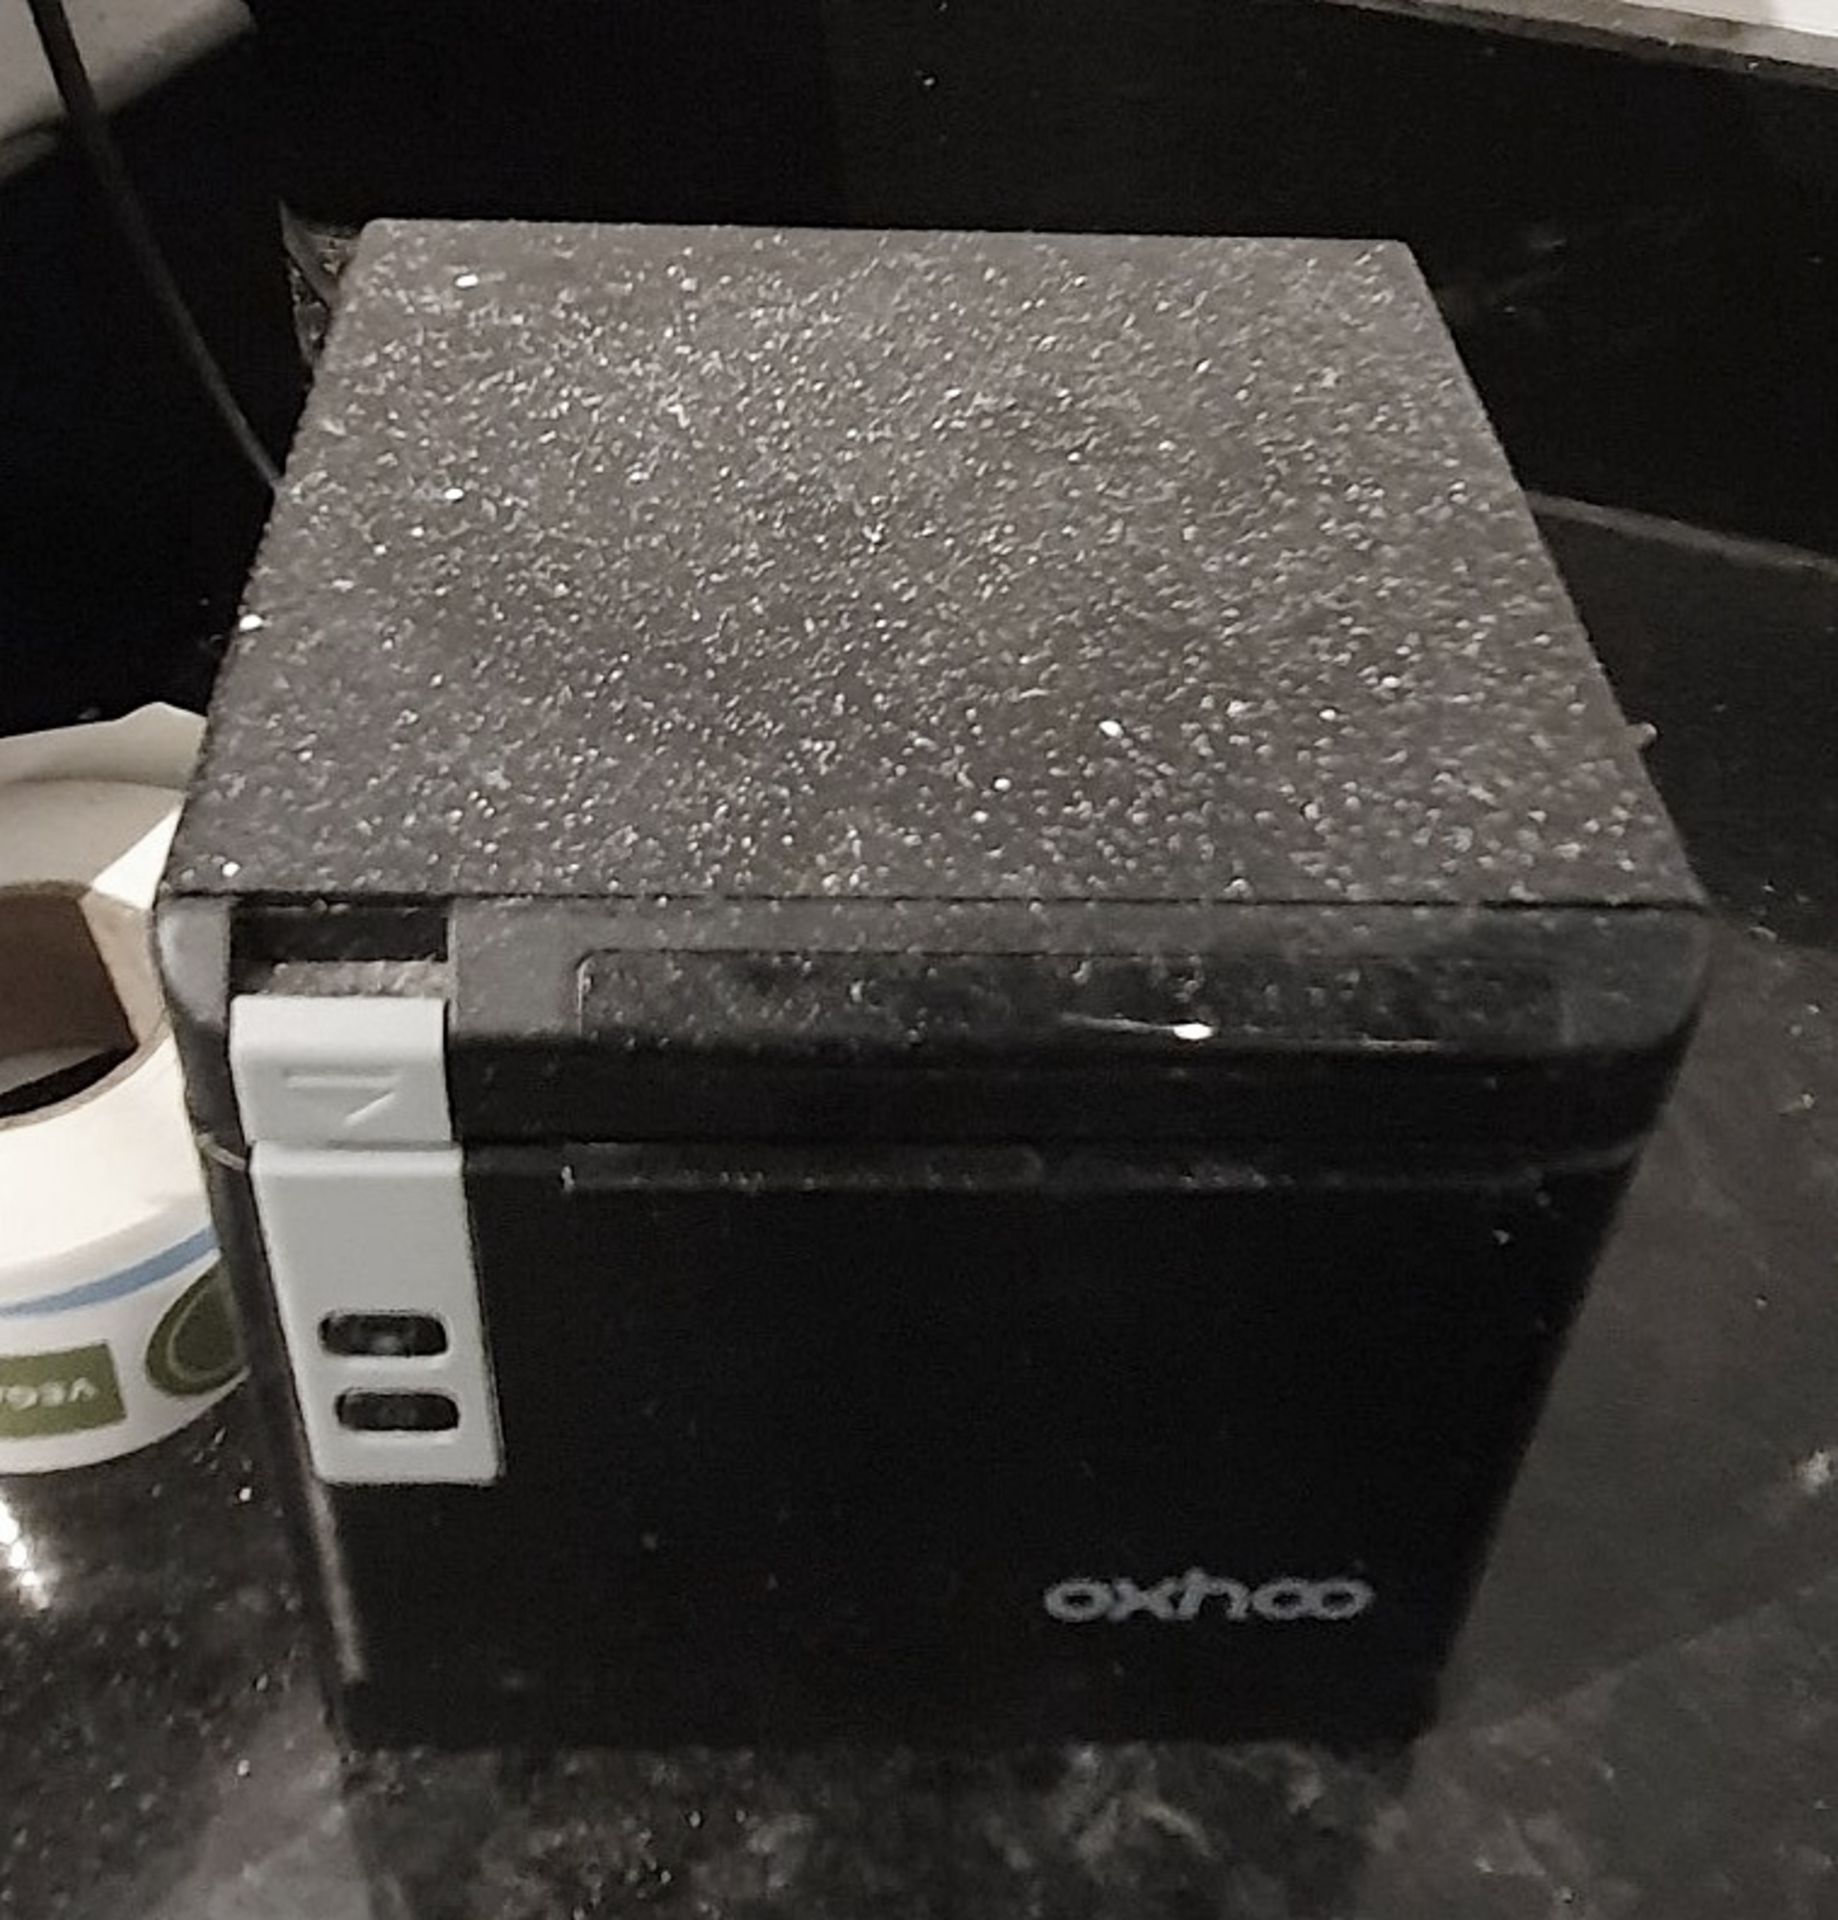 2 x Receipt Printers - Epson and Oxhoo - With Power Adaptors - Ref PA - CL463 - Location: Newbury - Image 2 of 2